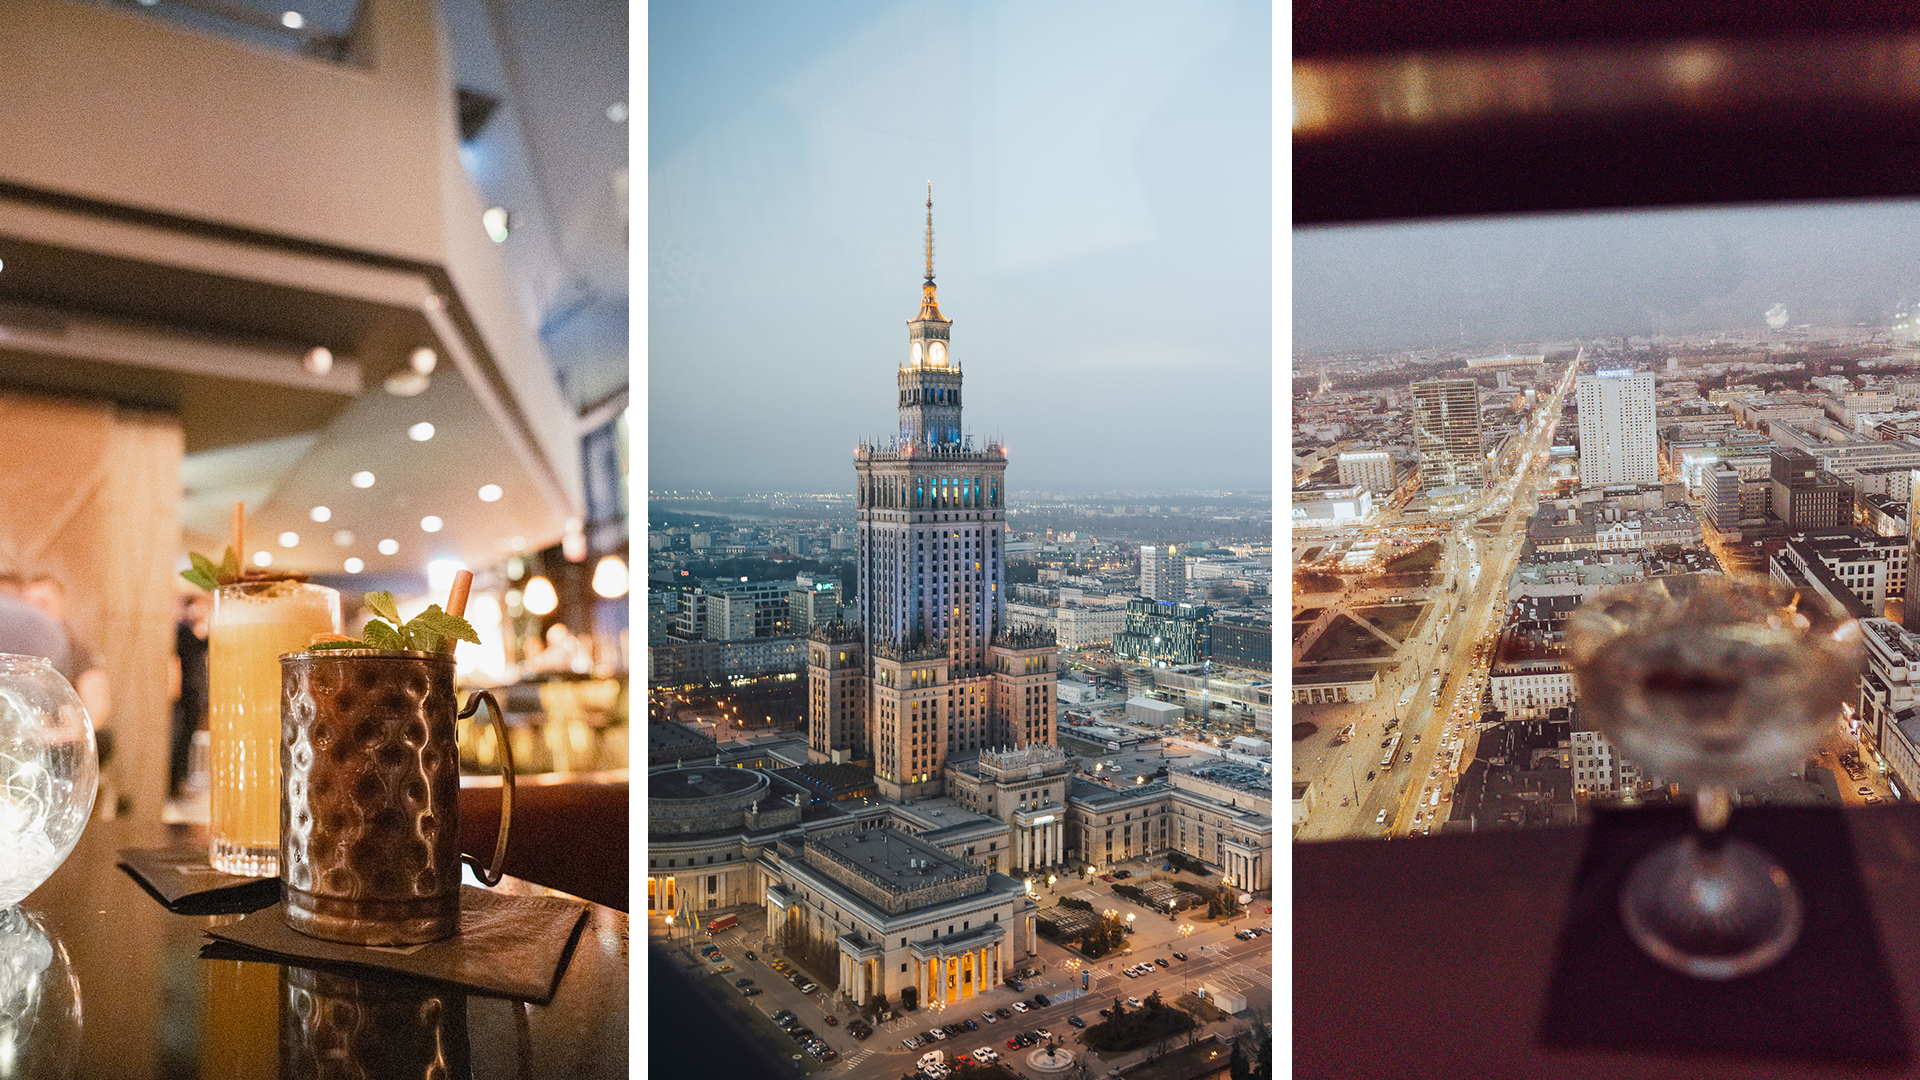 Three vertical photos in one picture, all taken from the Panorama Sky Bar of the Marriott Hotel in Warsaw, Poland. In the left picture, we see two cocktails in a modern bar interior in the background. In the middle photo, there is an evening view of the Palace of Culture and Science, its decorative lights just turning on blue and yellow. In the right picture, we see a blurry martini cocktail in the foreground with evening Warsaw as a backdrop, in focus.